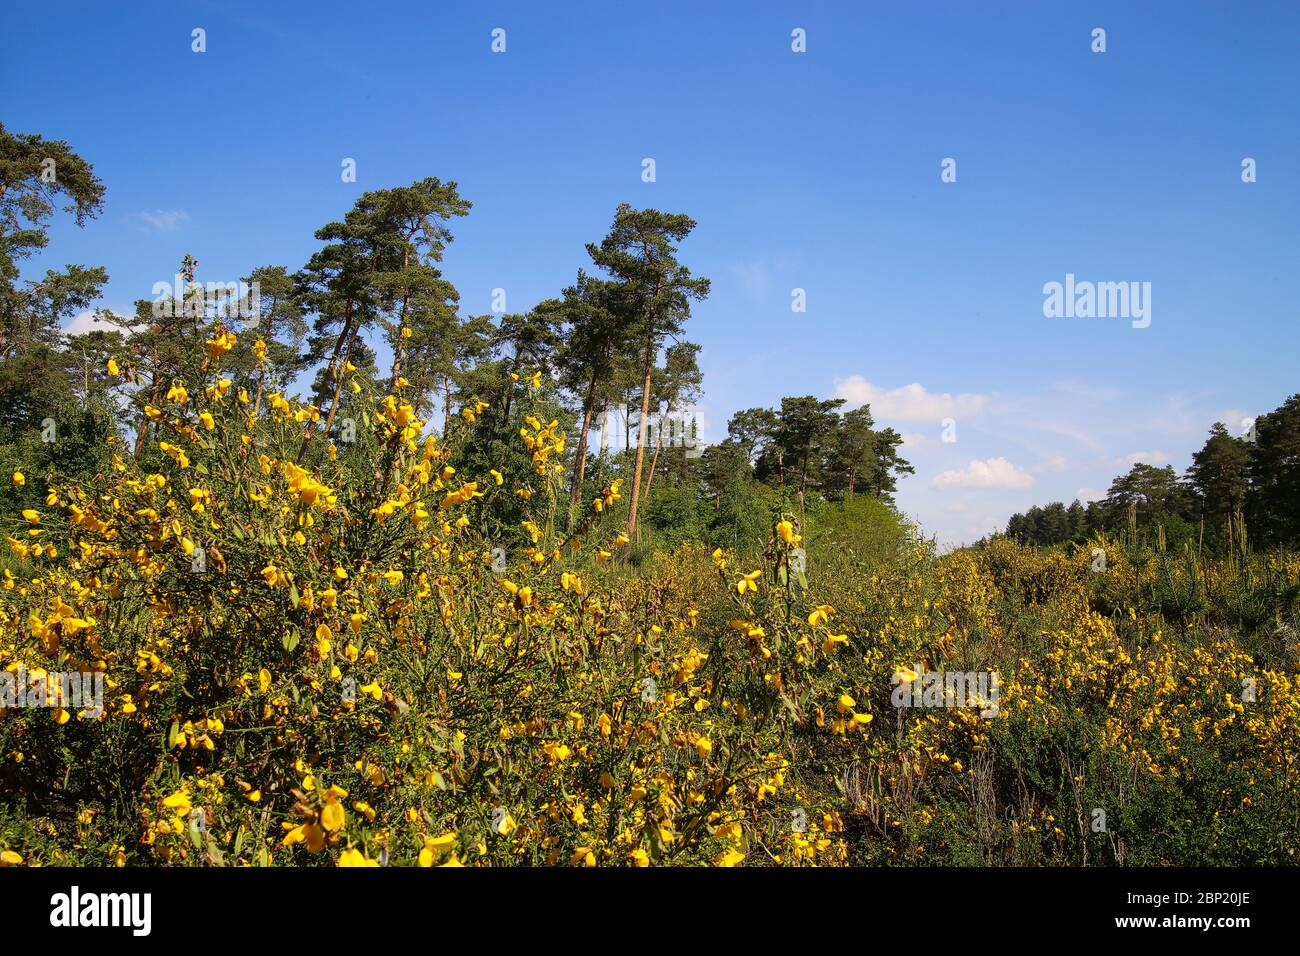 View on yellow blooming brooms bushes (genista pilosa) in dutch heath landscape with scots pine trees (pinus sylvestris) against blue sky - Swalmen, N Stock Photo